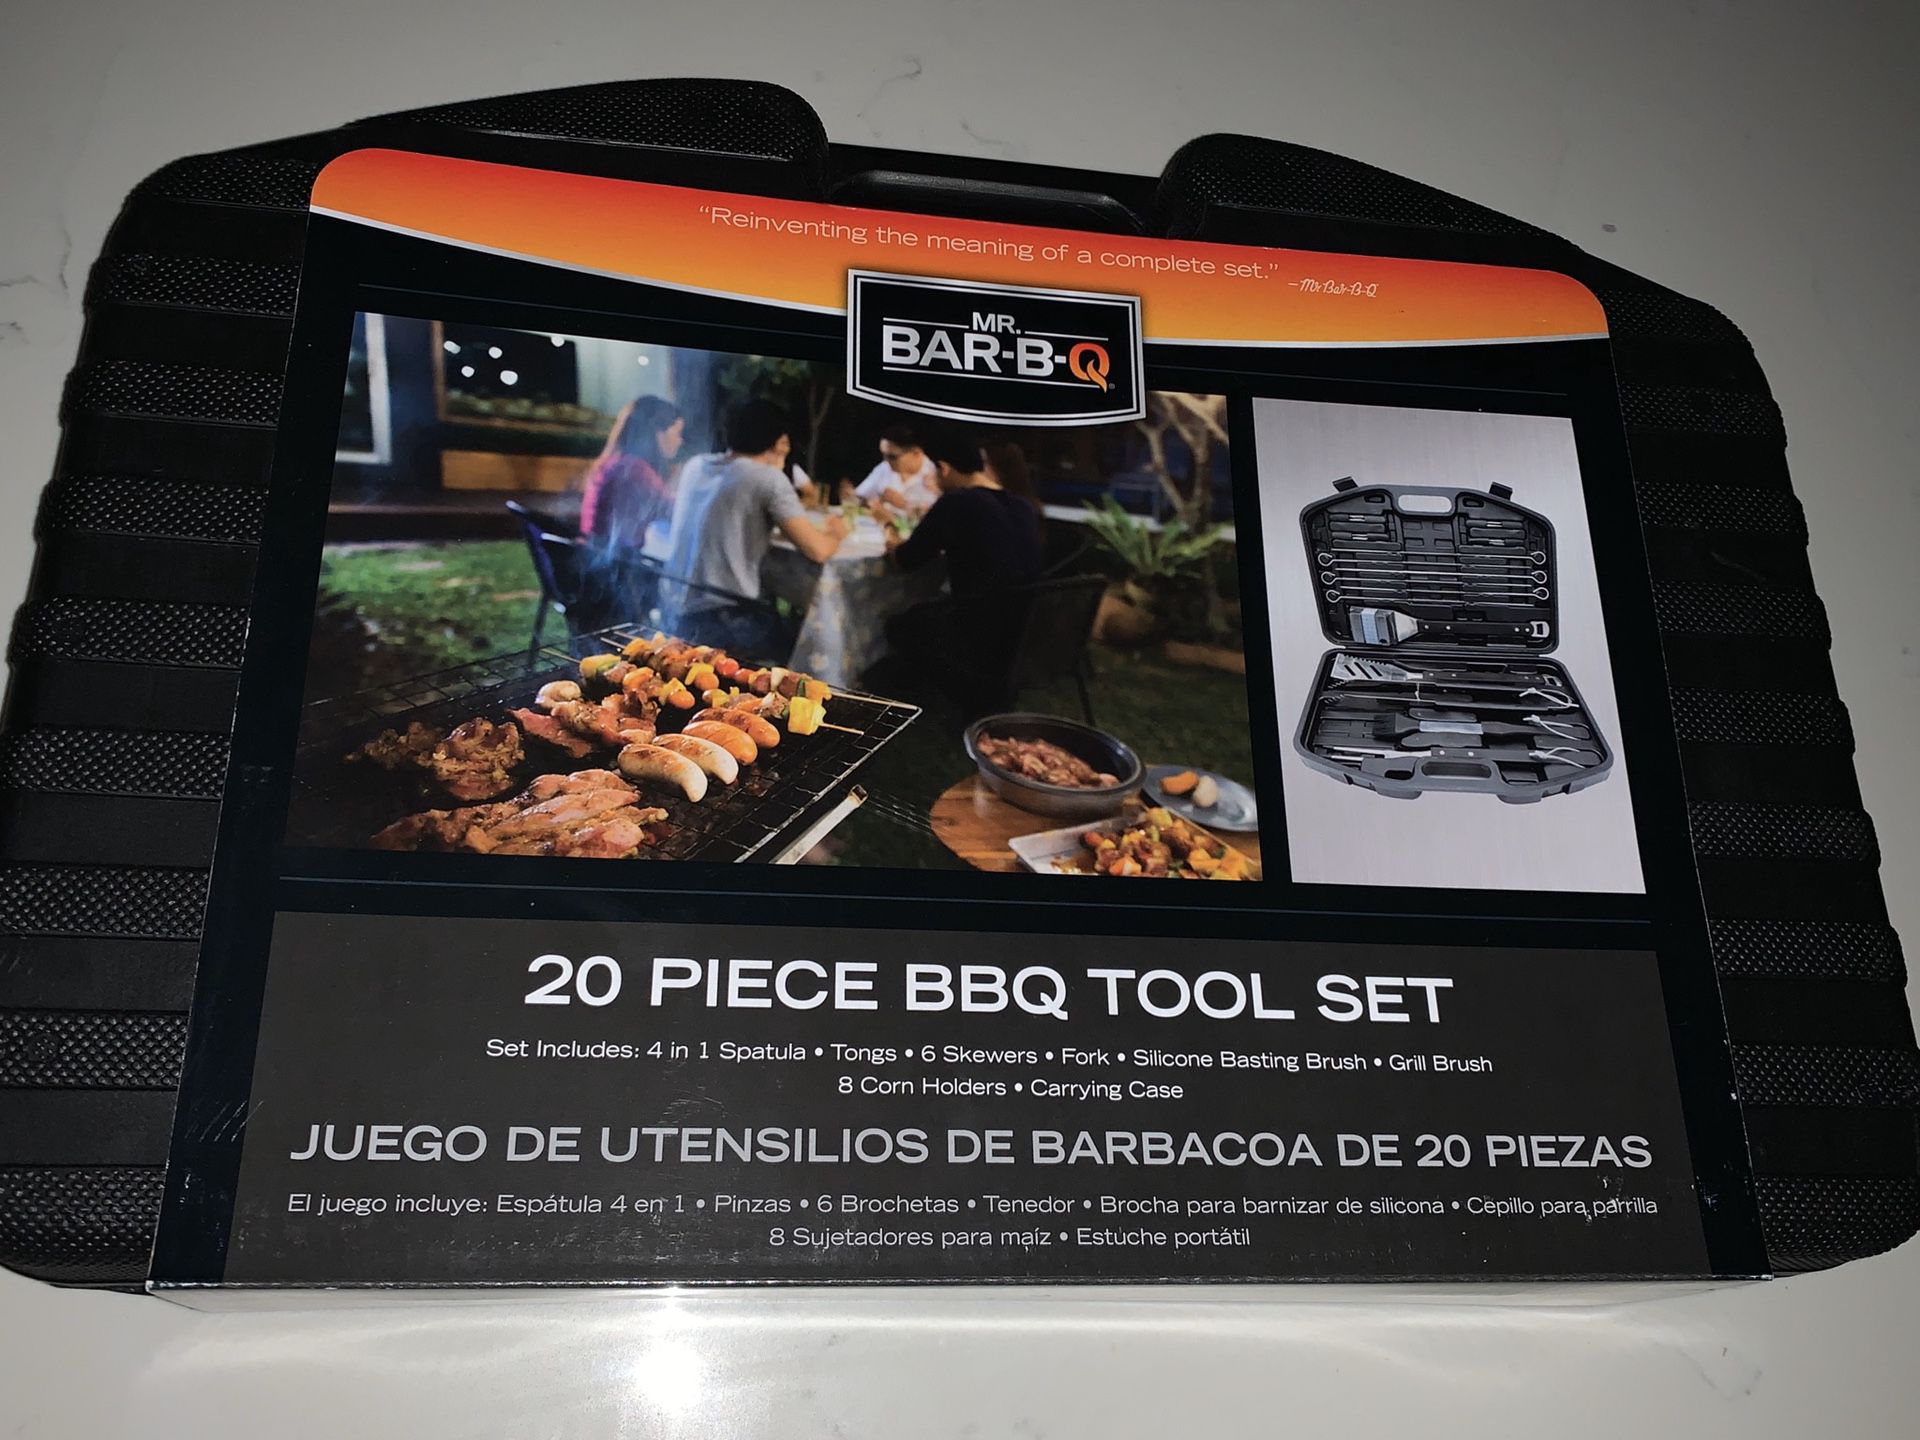 Mr. Bar-B-Q 20-piece BBQ grill tool set BRAND NEW tongs, fork, brushes, 6 skewers